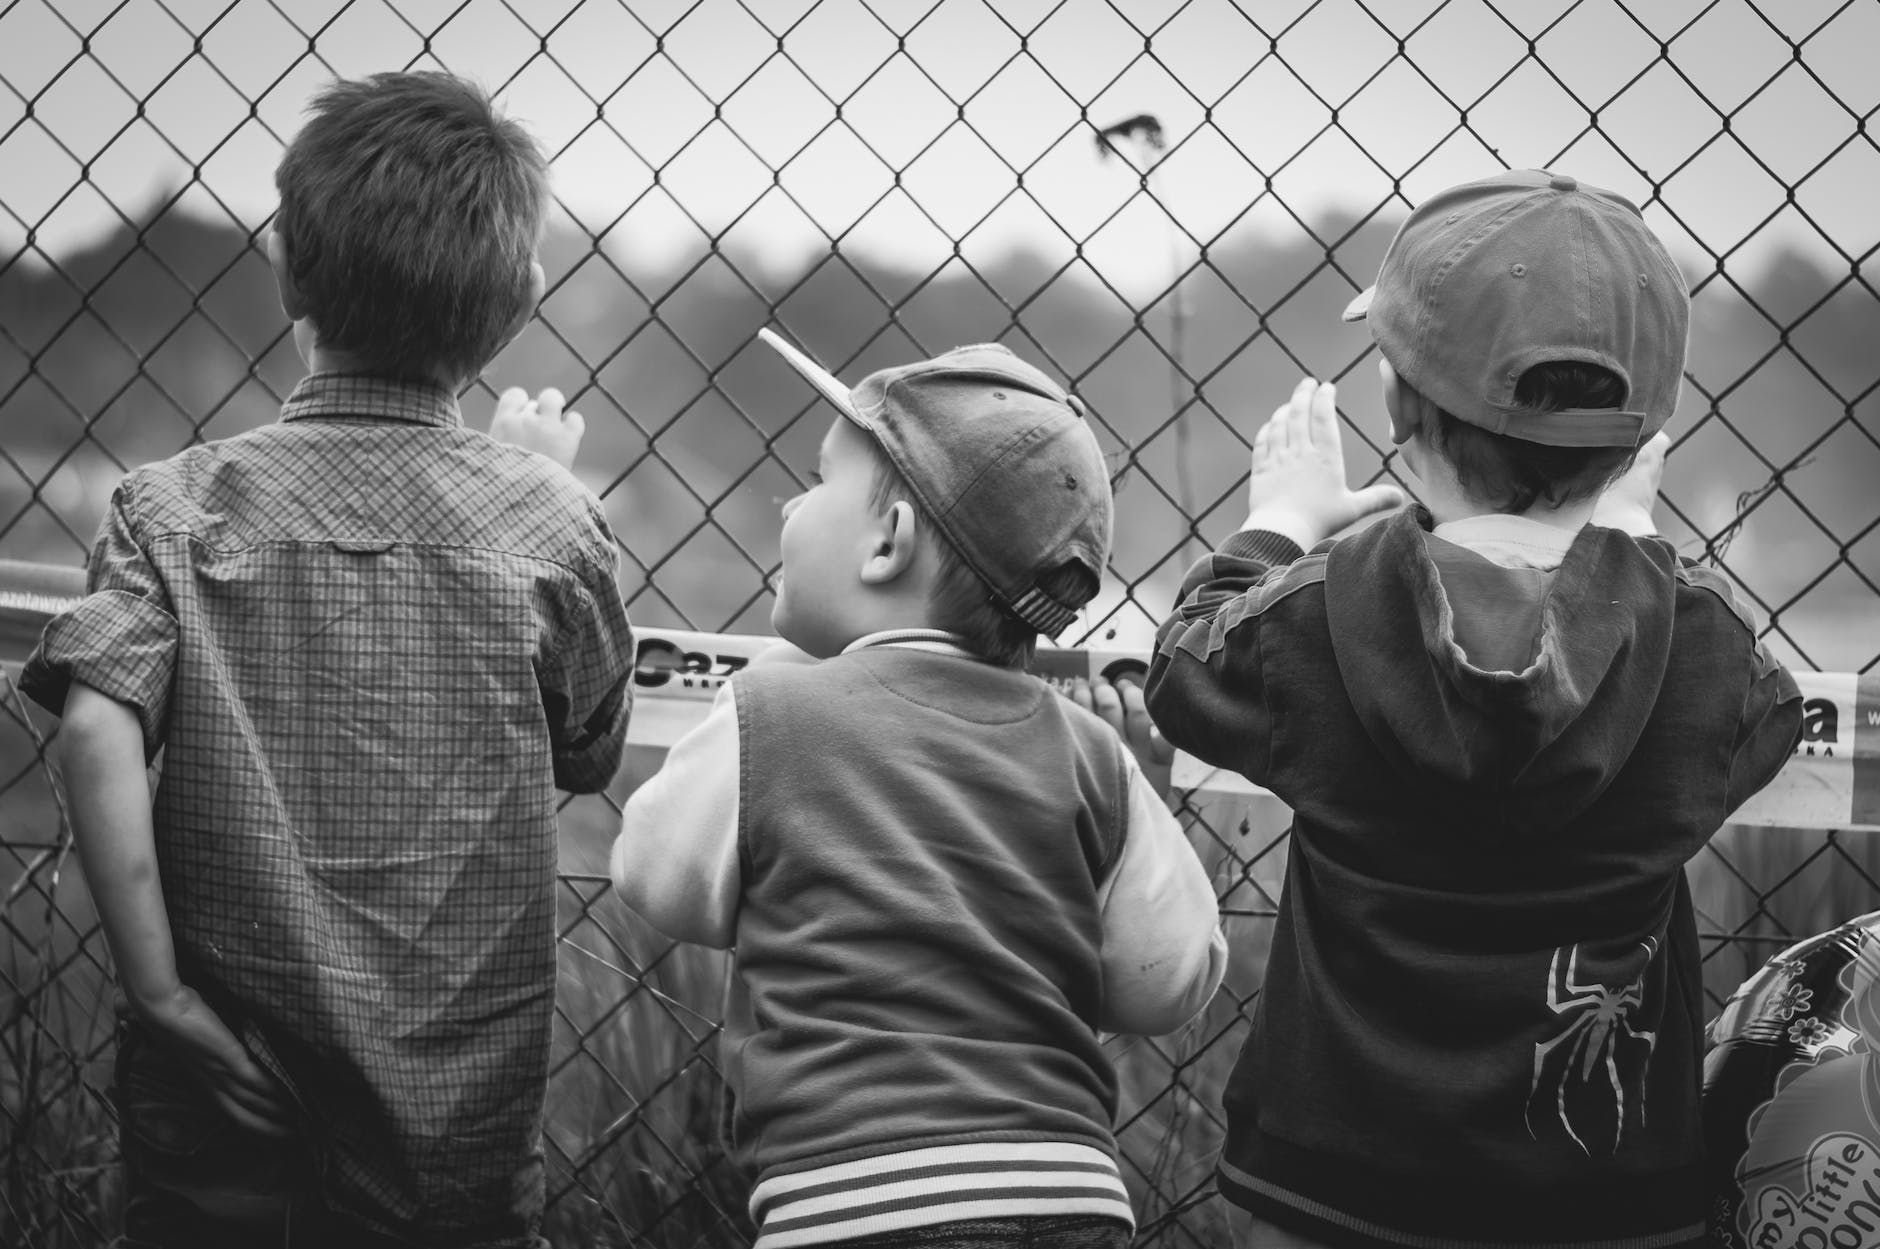 grayscale photography of three boys facing towards fence